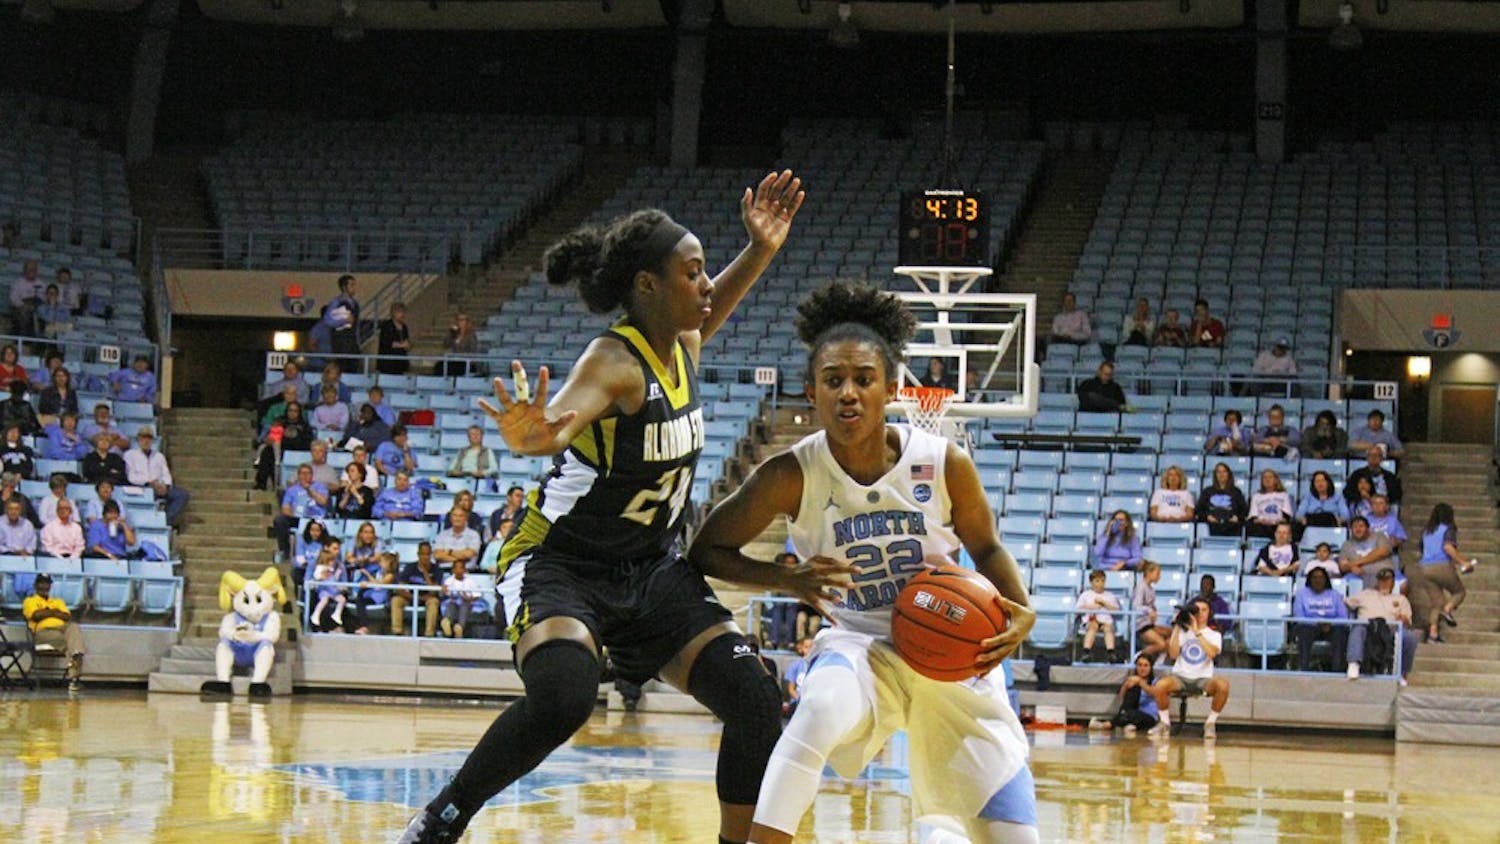 Paris Kea (22) drives the ball forward in the game against Alabama State on Friday.